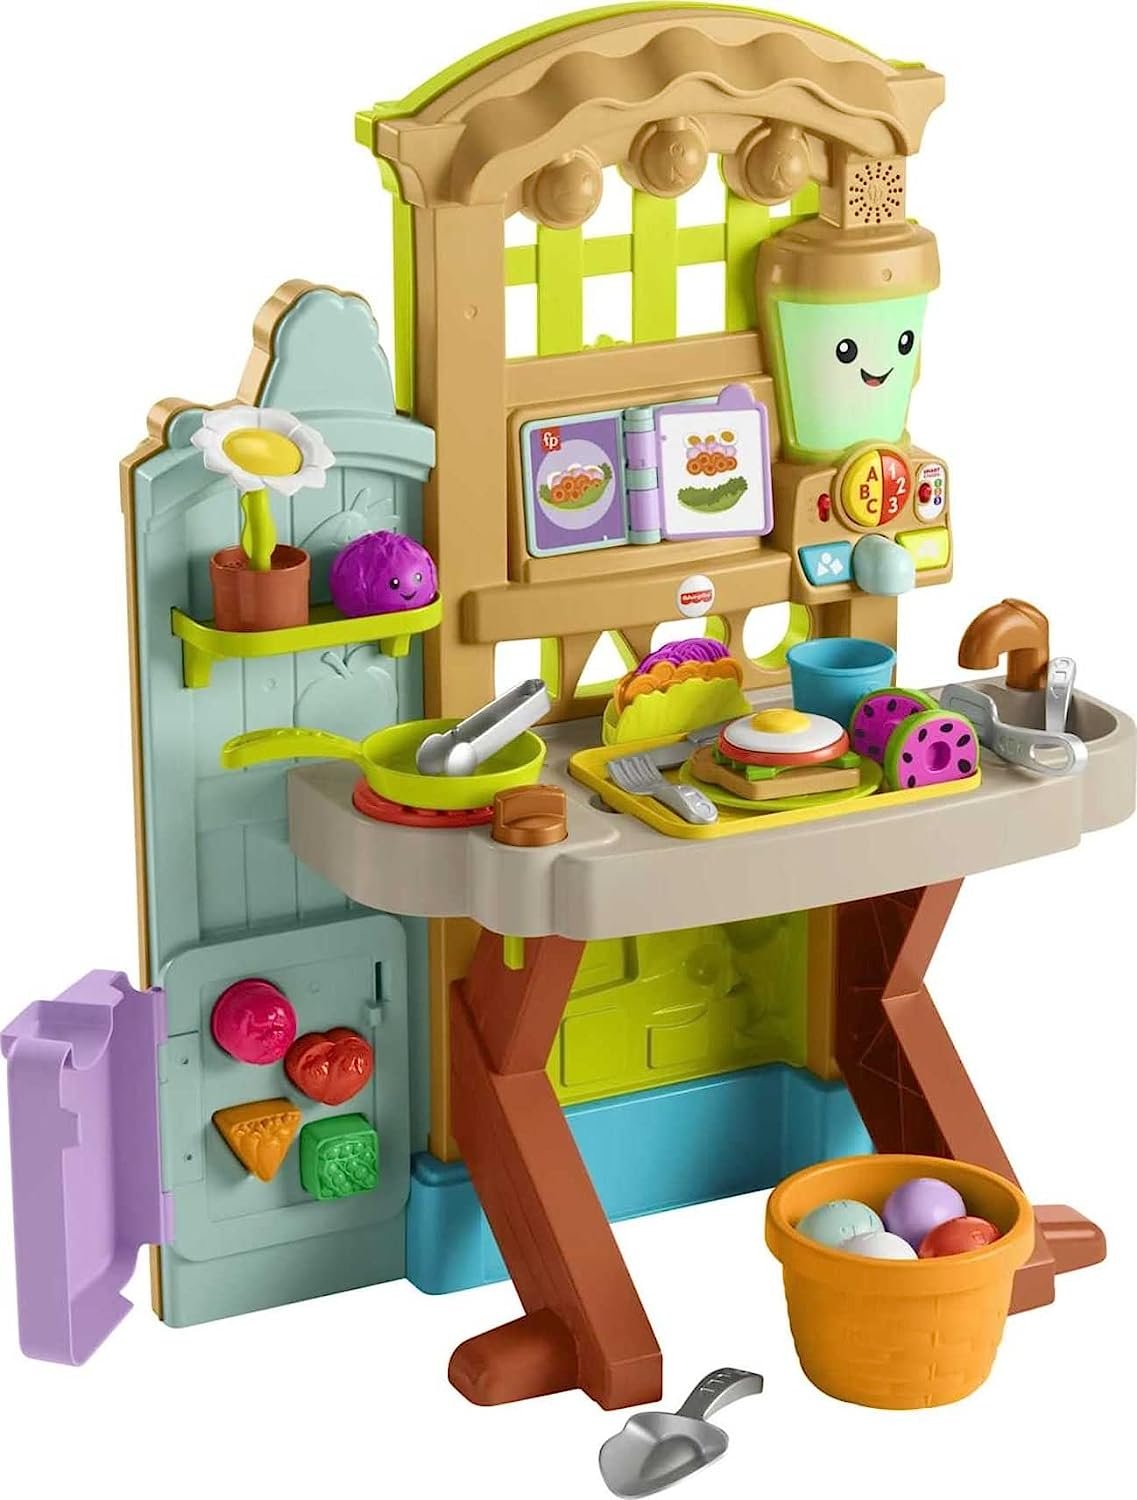 Fisher-Price Laugh & Learn Grow-the-Fun Garden to Kitchen, Interactive Farm-to-Kitchen Playset for Toddlers with Music, Lights and Learning Content - image 1 of 8